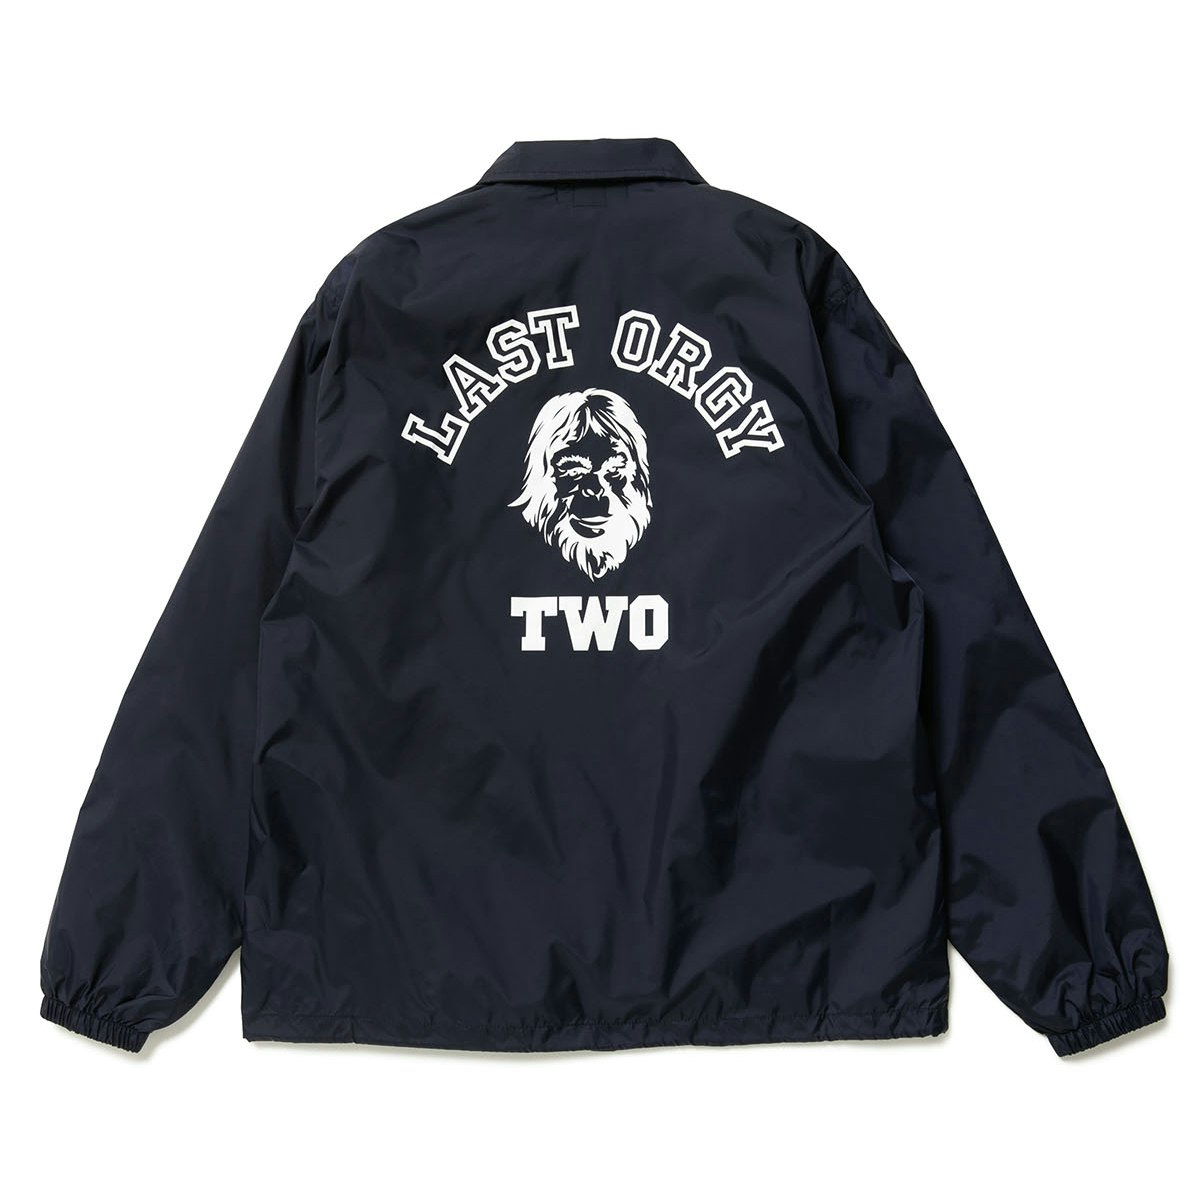 Human Made x Undercover Last Orgy 2 Coach Jacket Navy - SS22 - CN